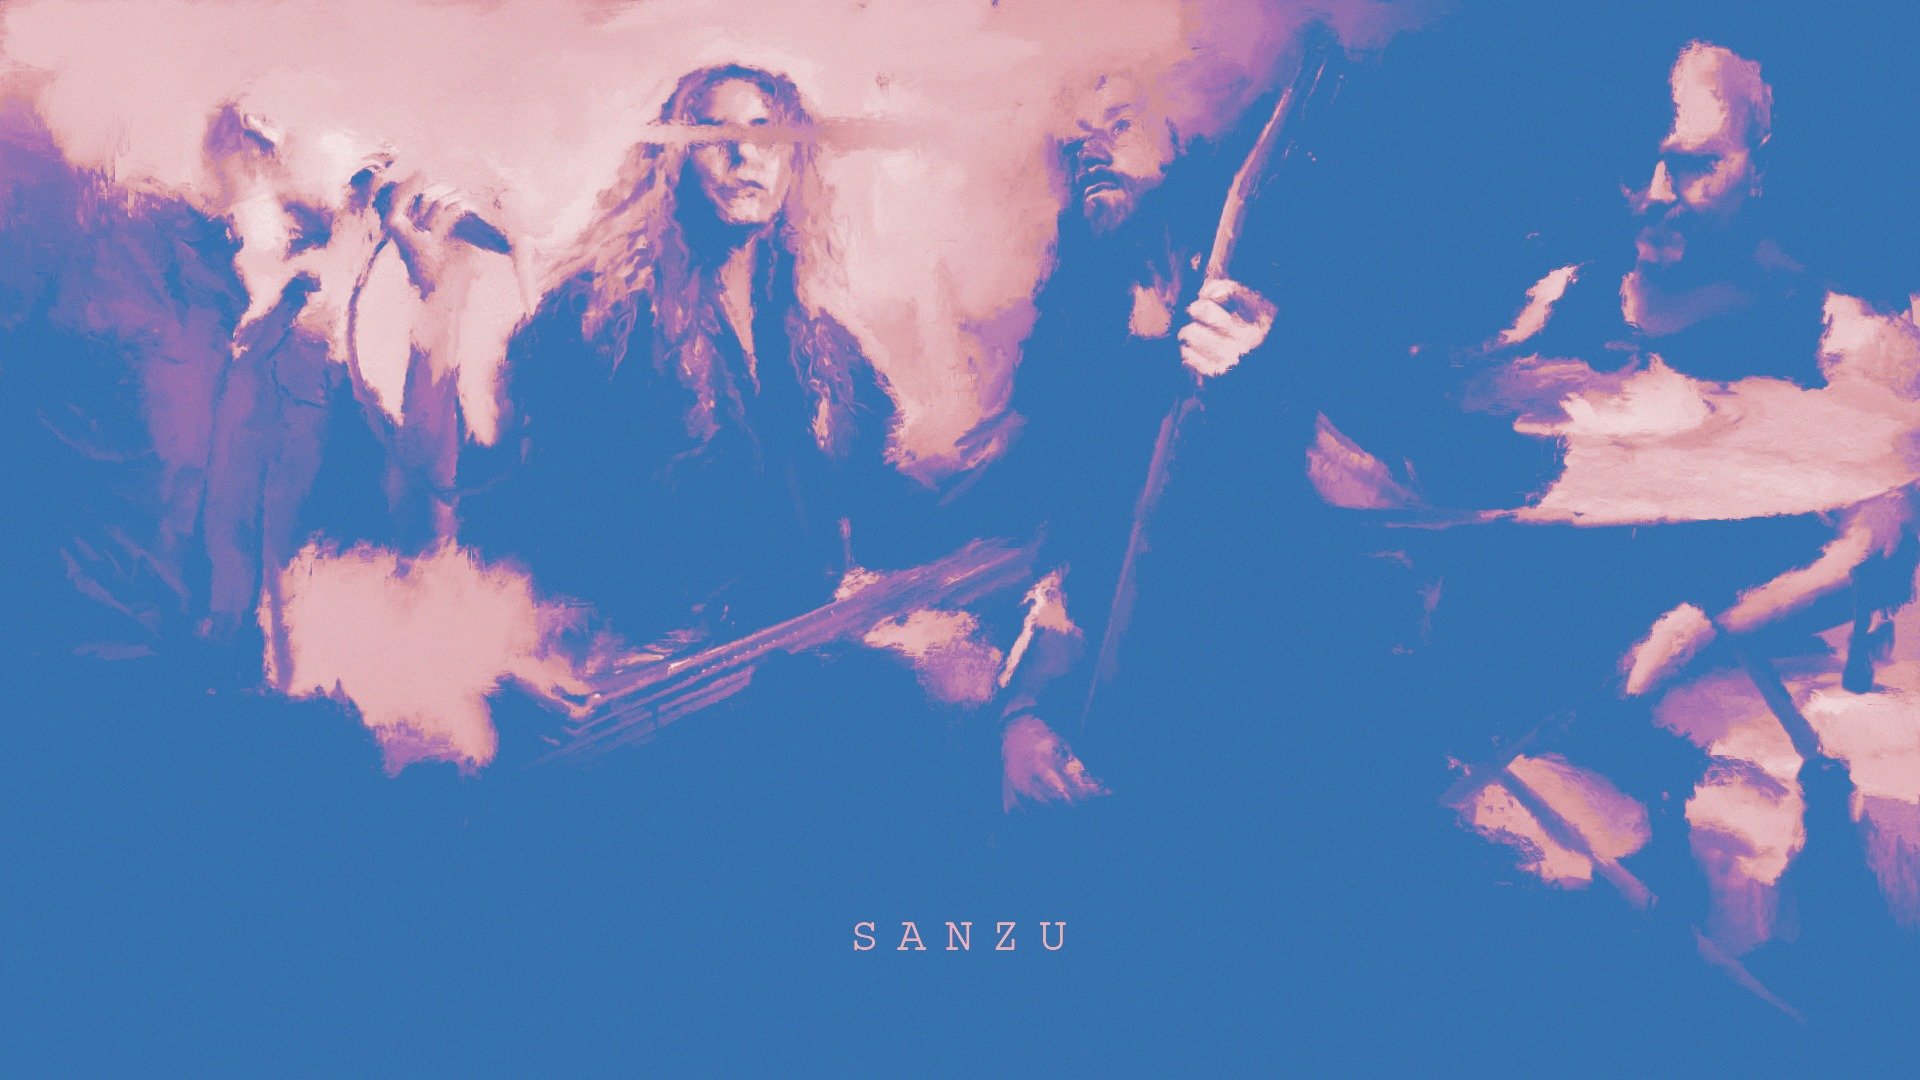 Read more about the article SANZU: Australian Death-Metal Outfit Unleash Video For New Song “Throne Of Rope”.